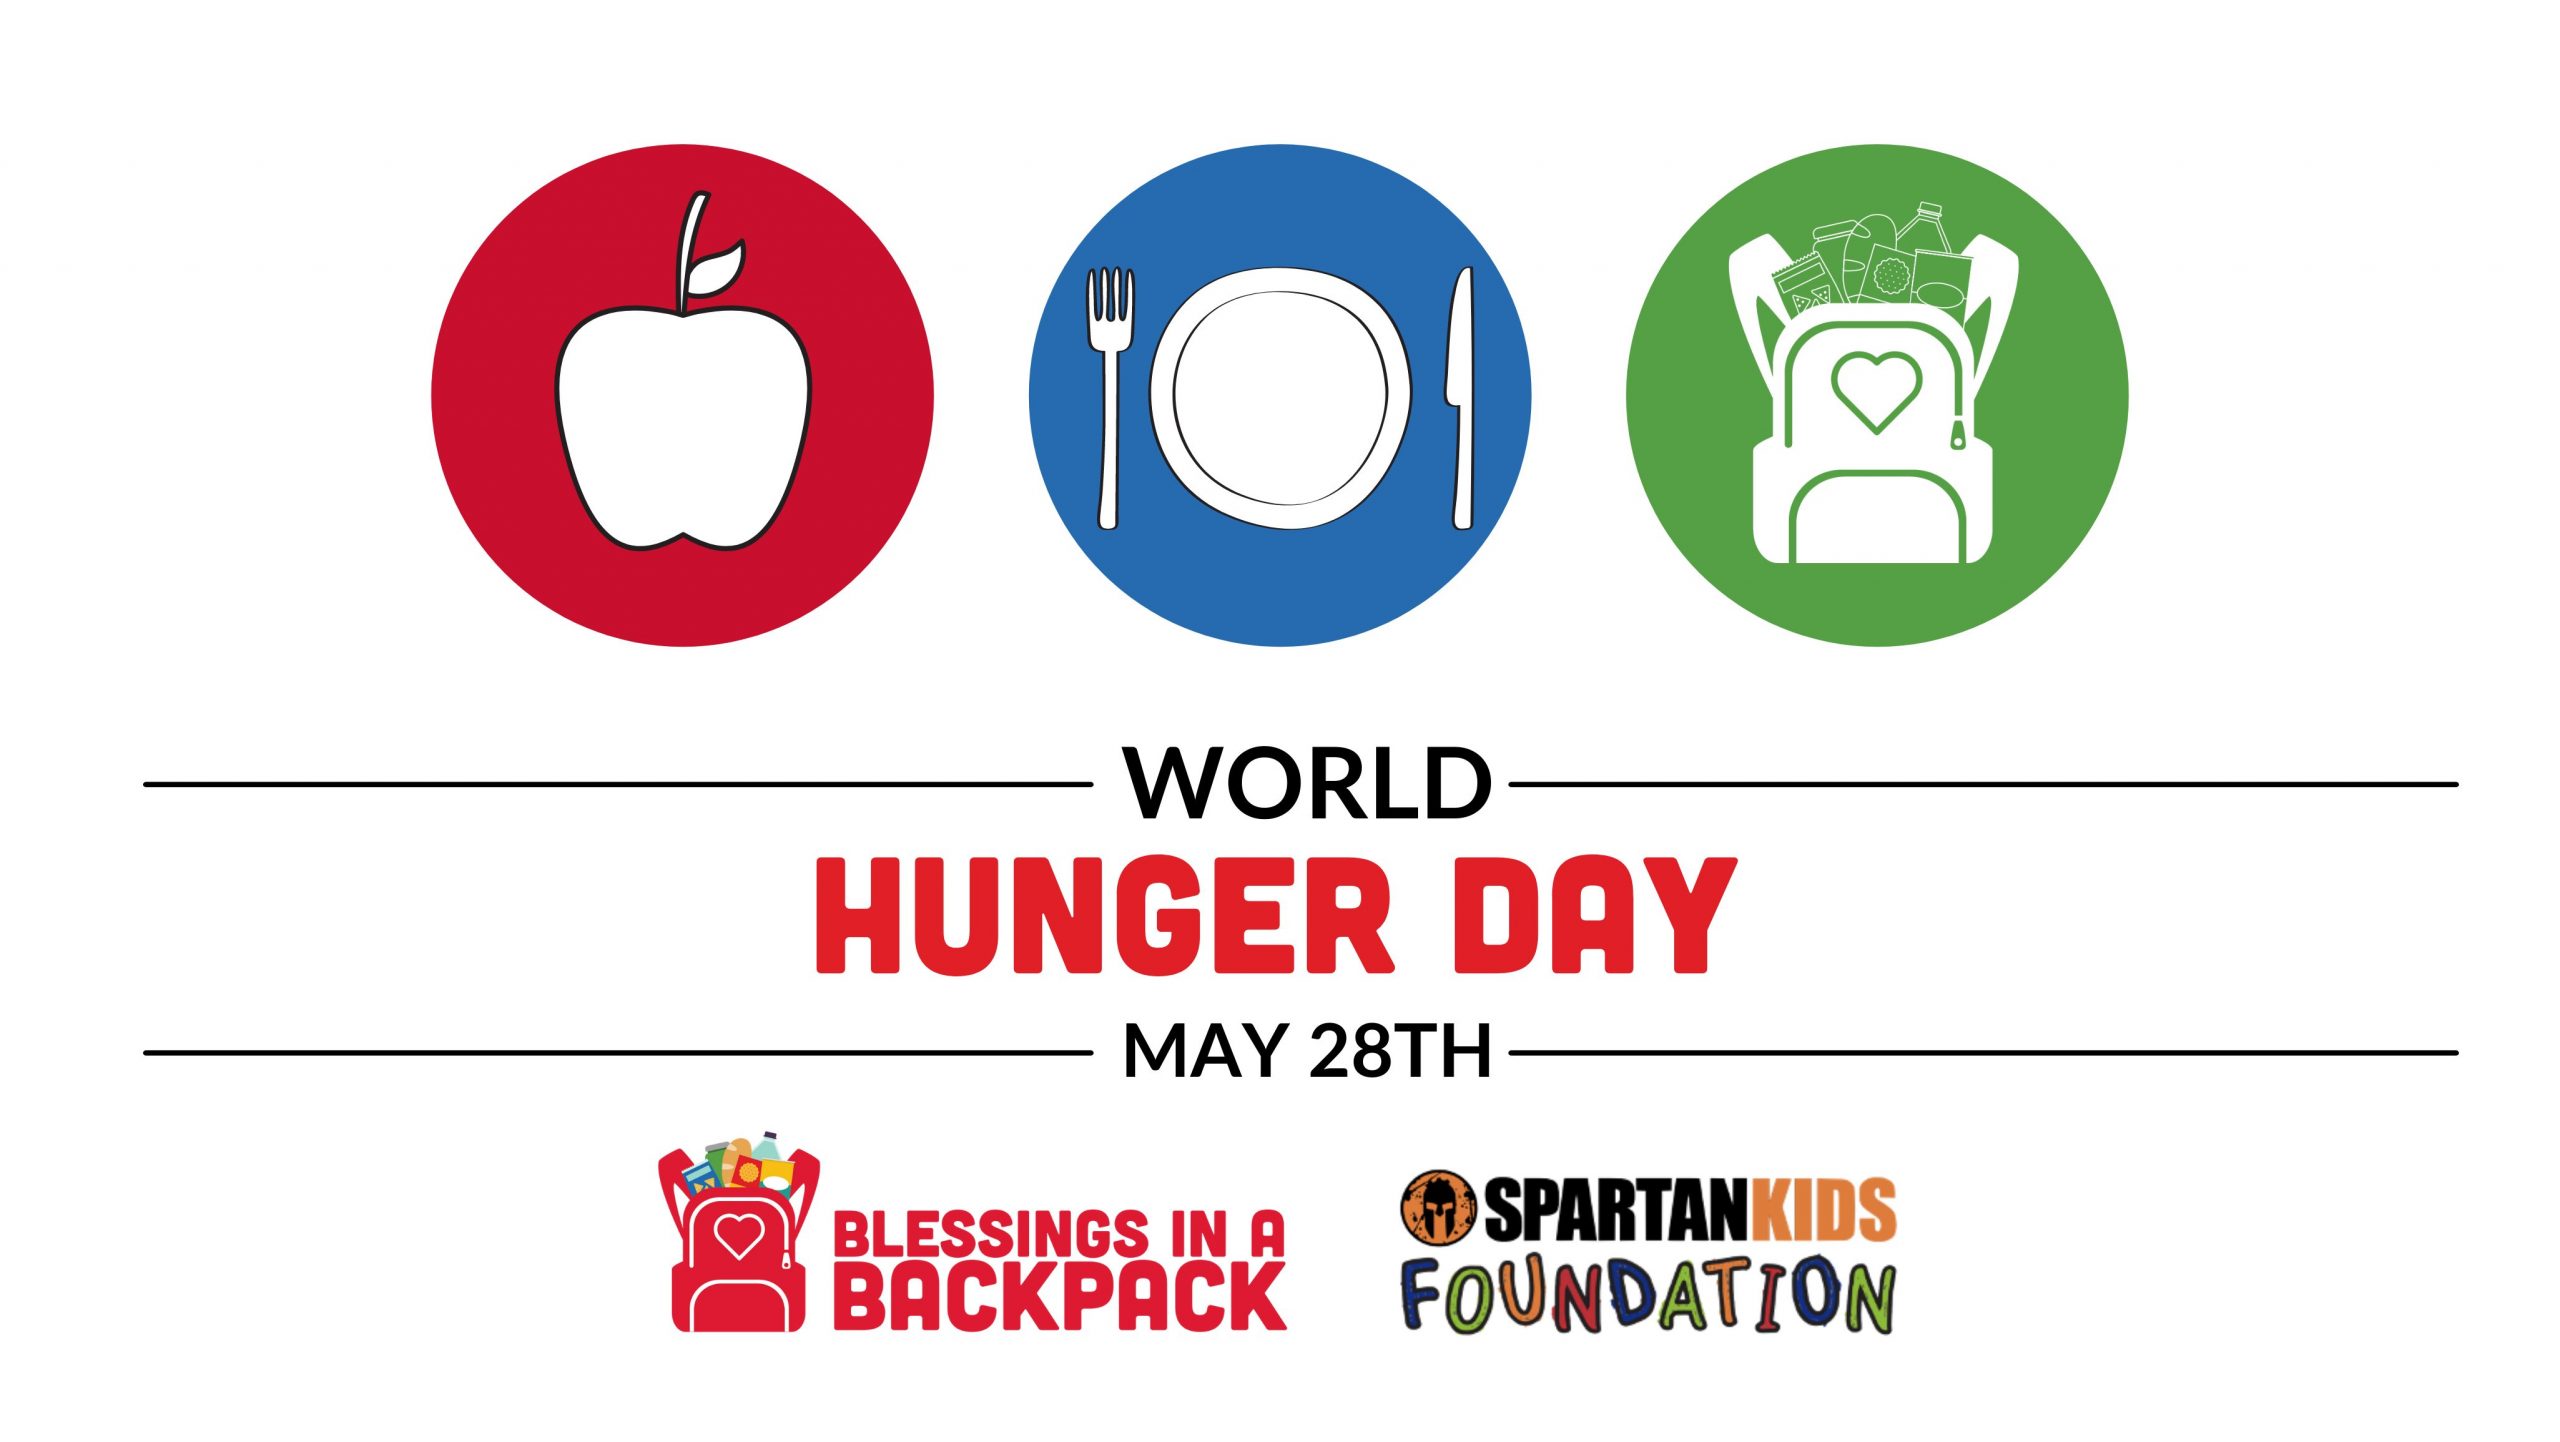 Spartan Kids Foundation Matching $3,000 in Blessings Louisville Donations on World Hunger Day